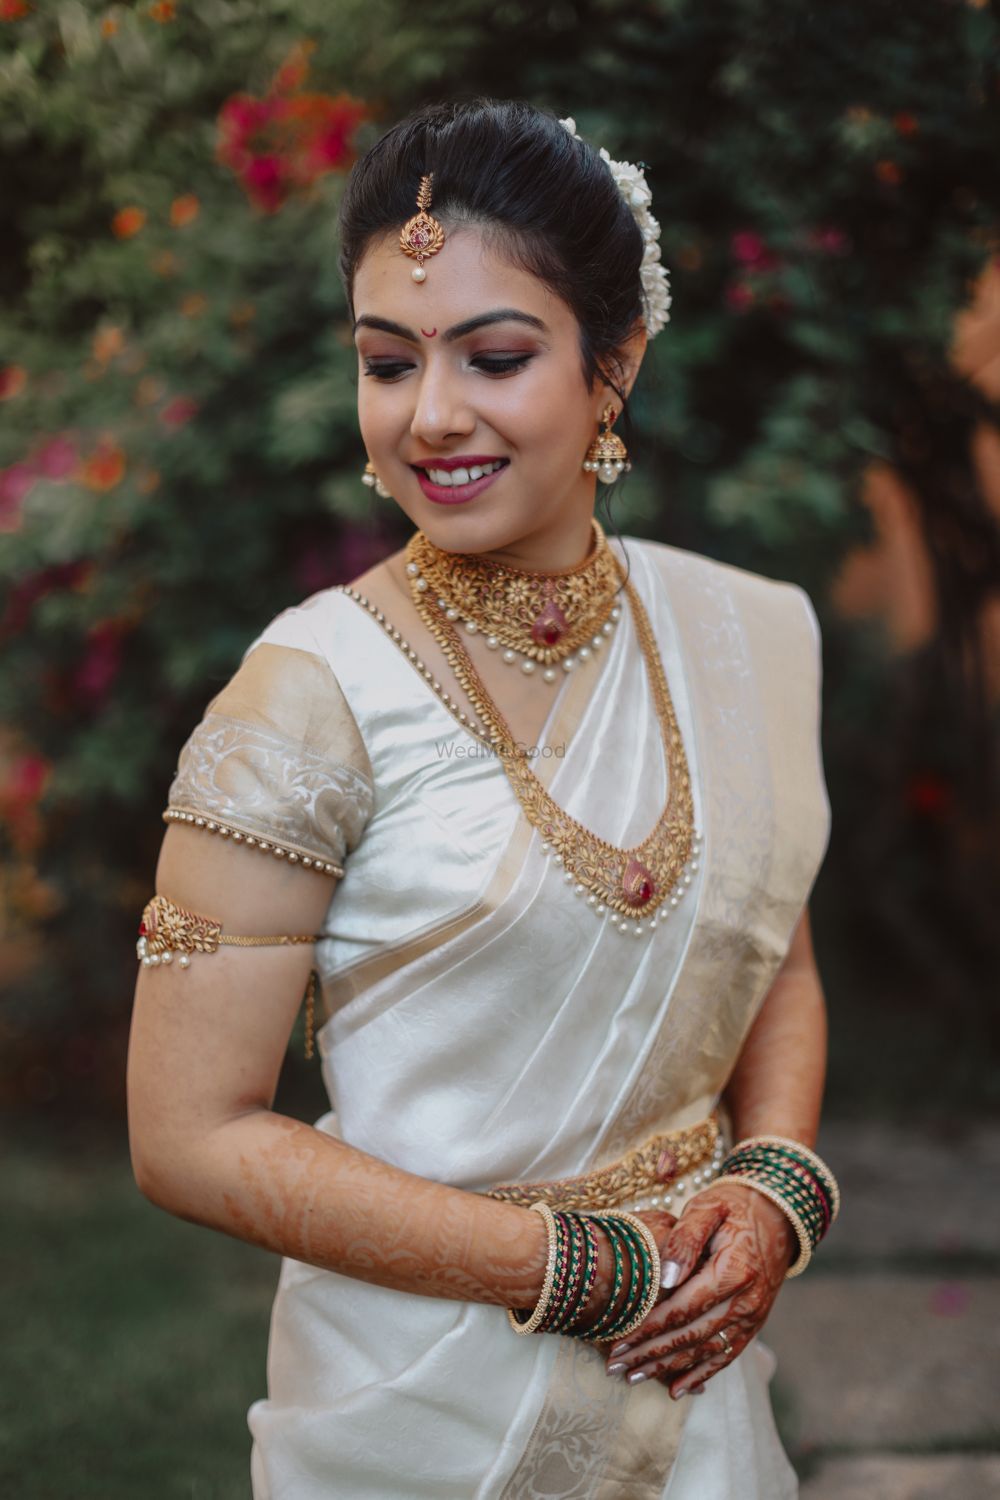 Photo of Malayali bride in gold jewellery and white saree.